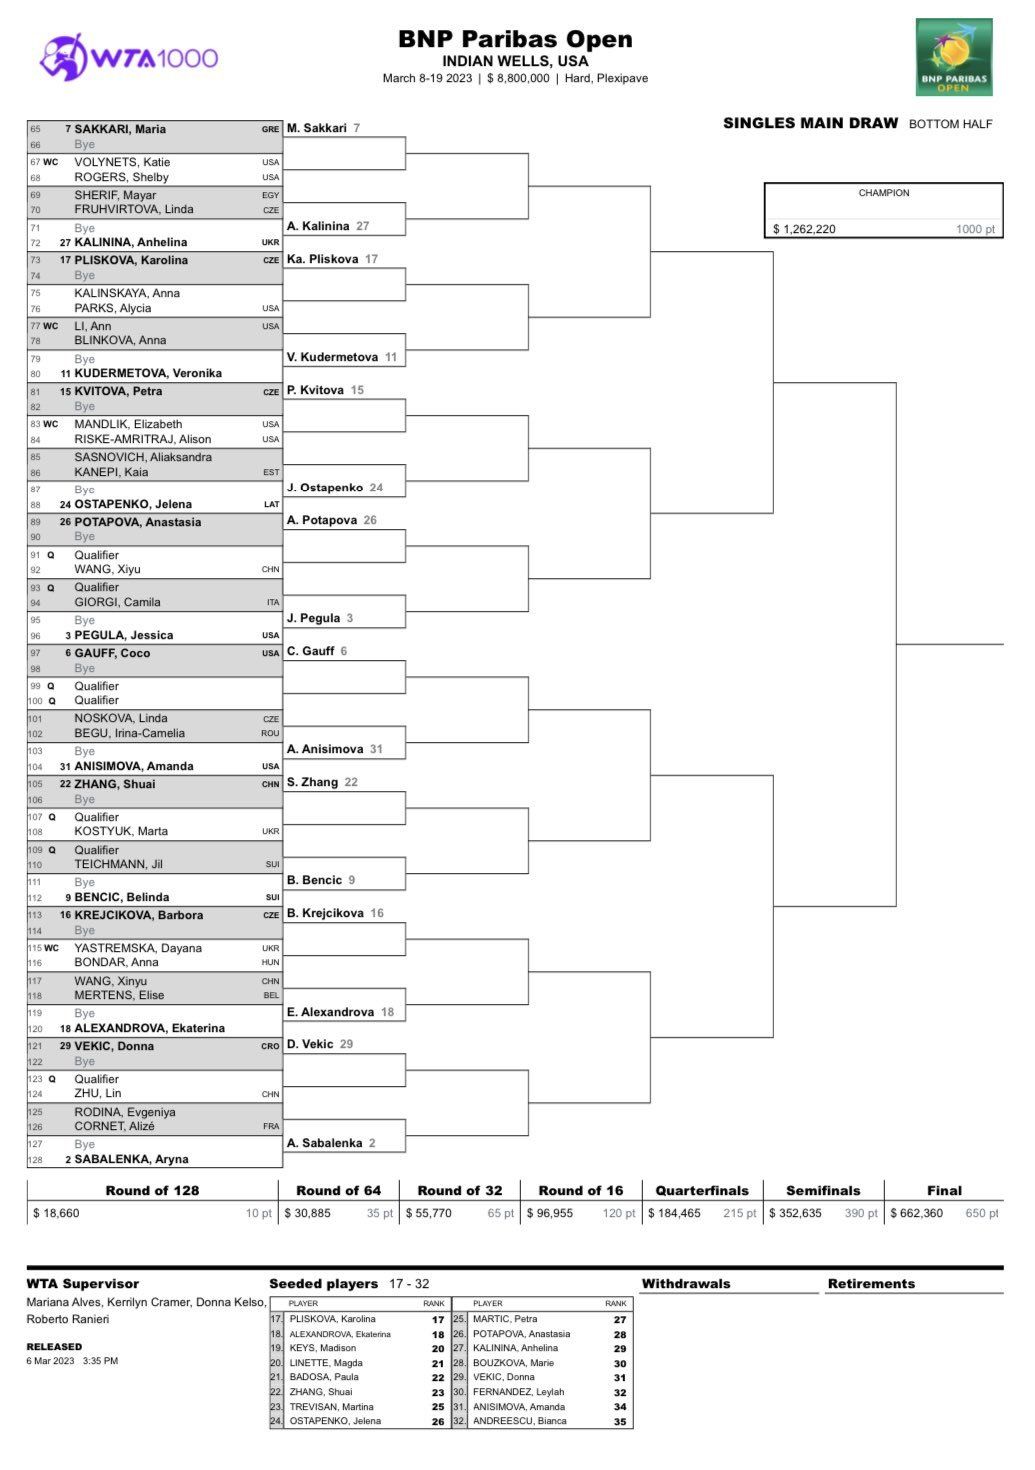 WTA Draw confirmed for 2023 BNP Paribas Open Indian Wells including